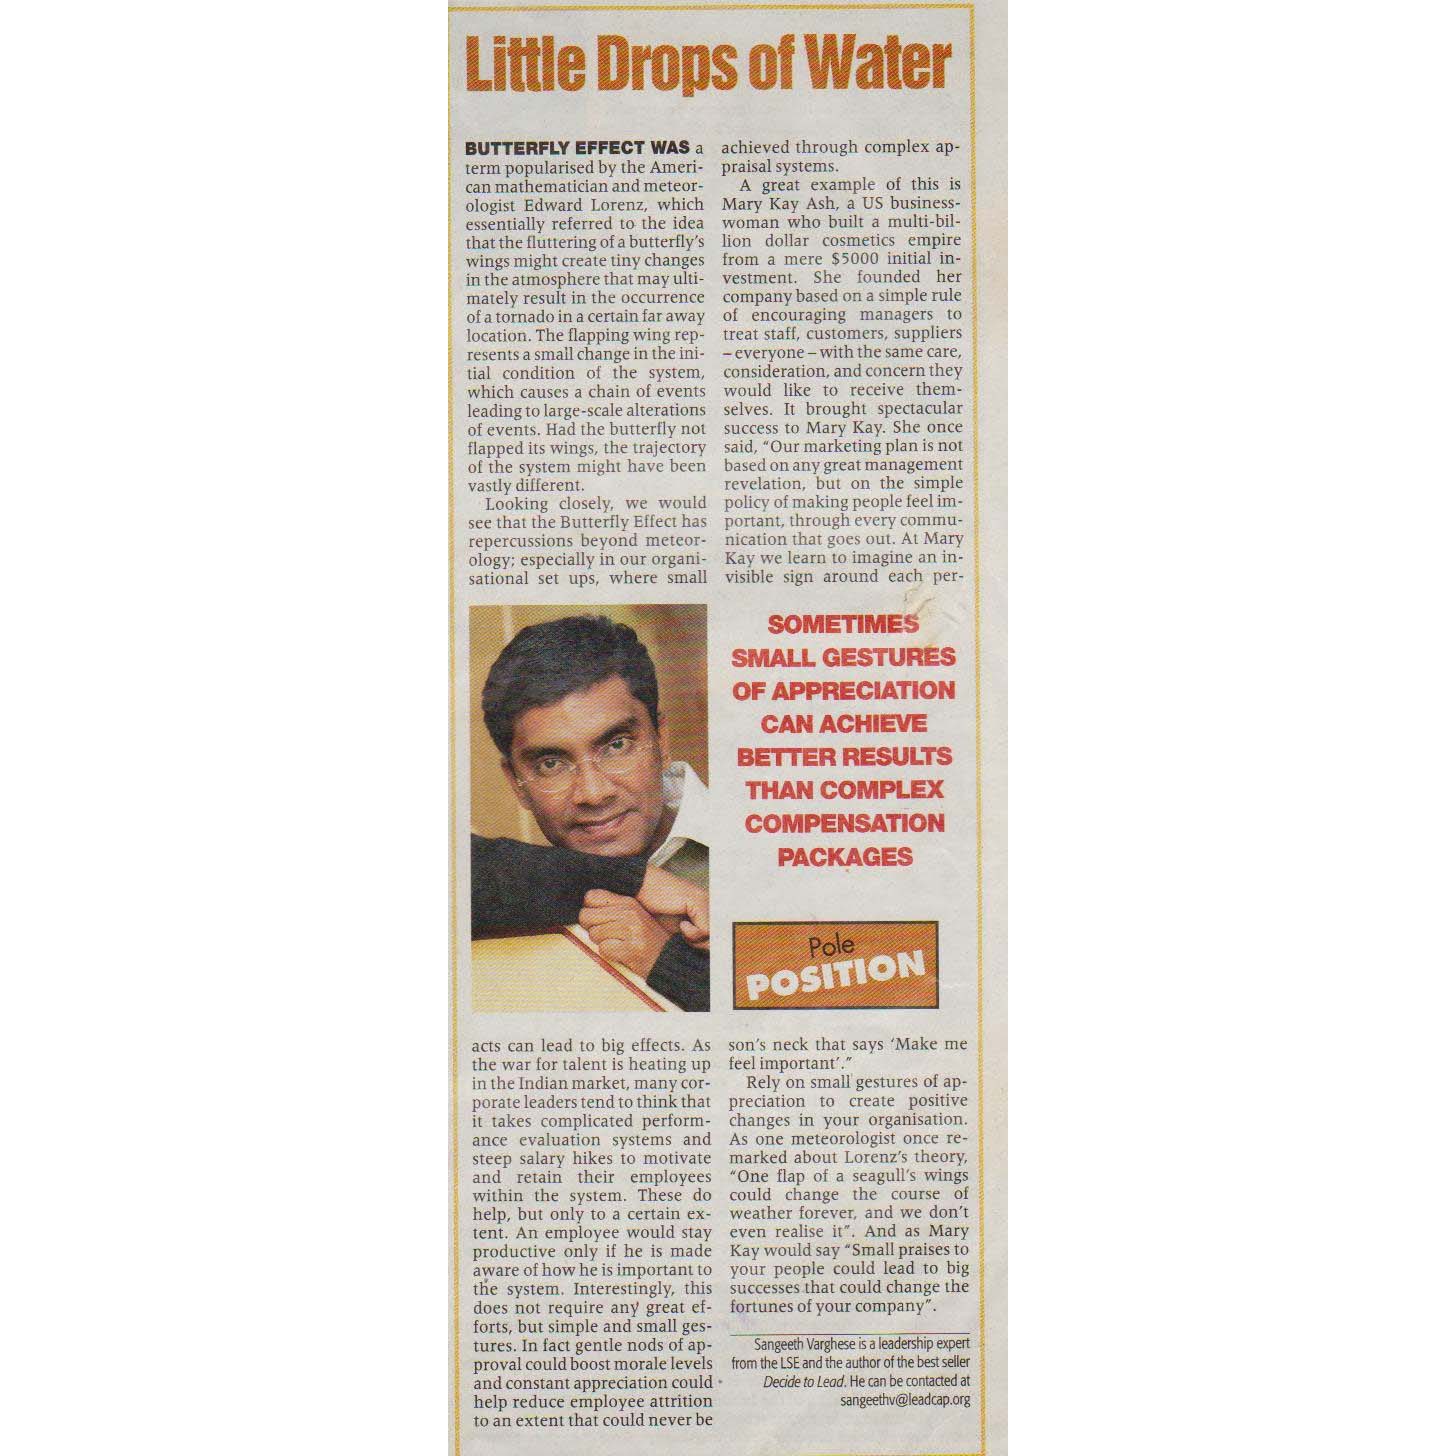 The Economic Times 10 October 2008